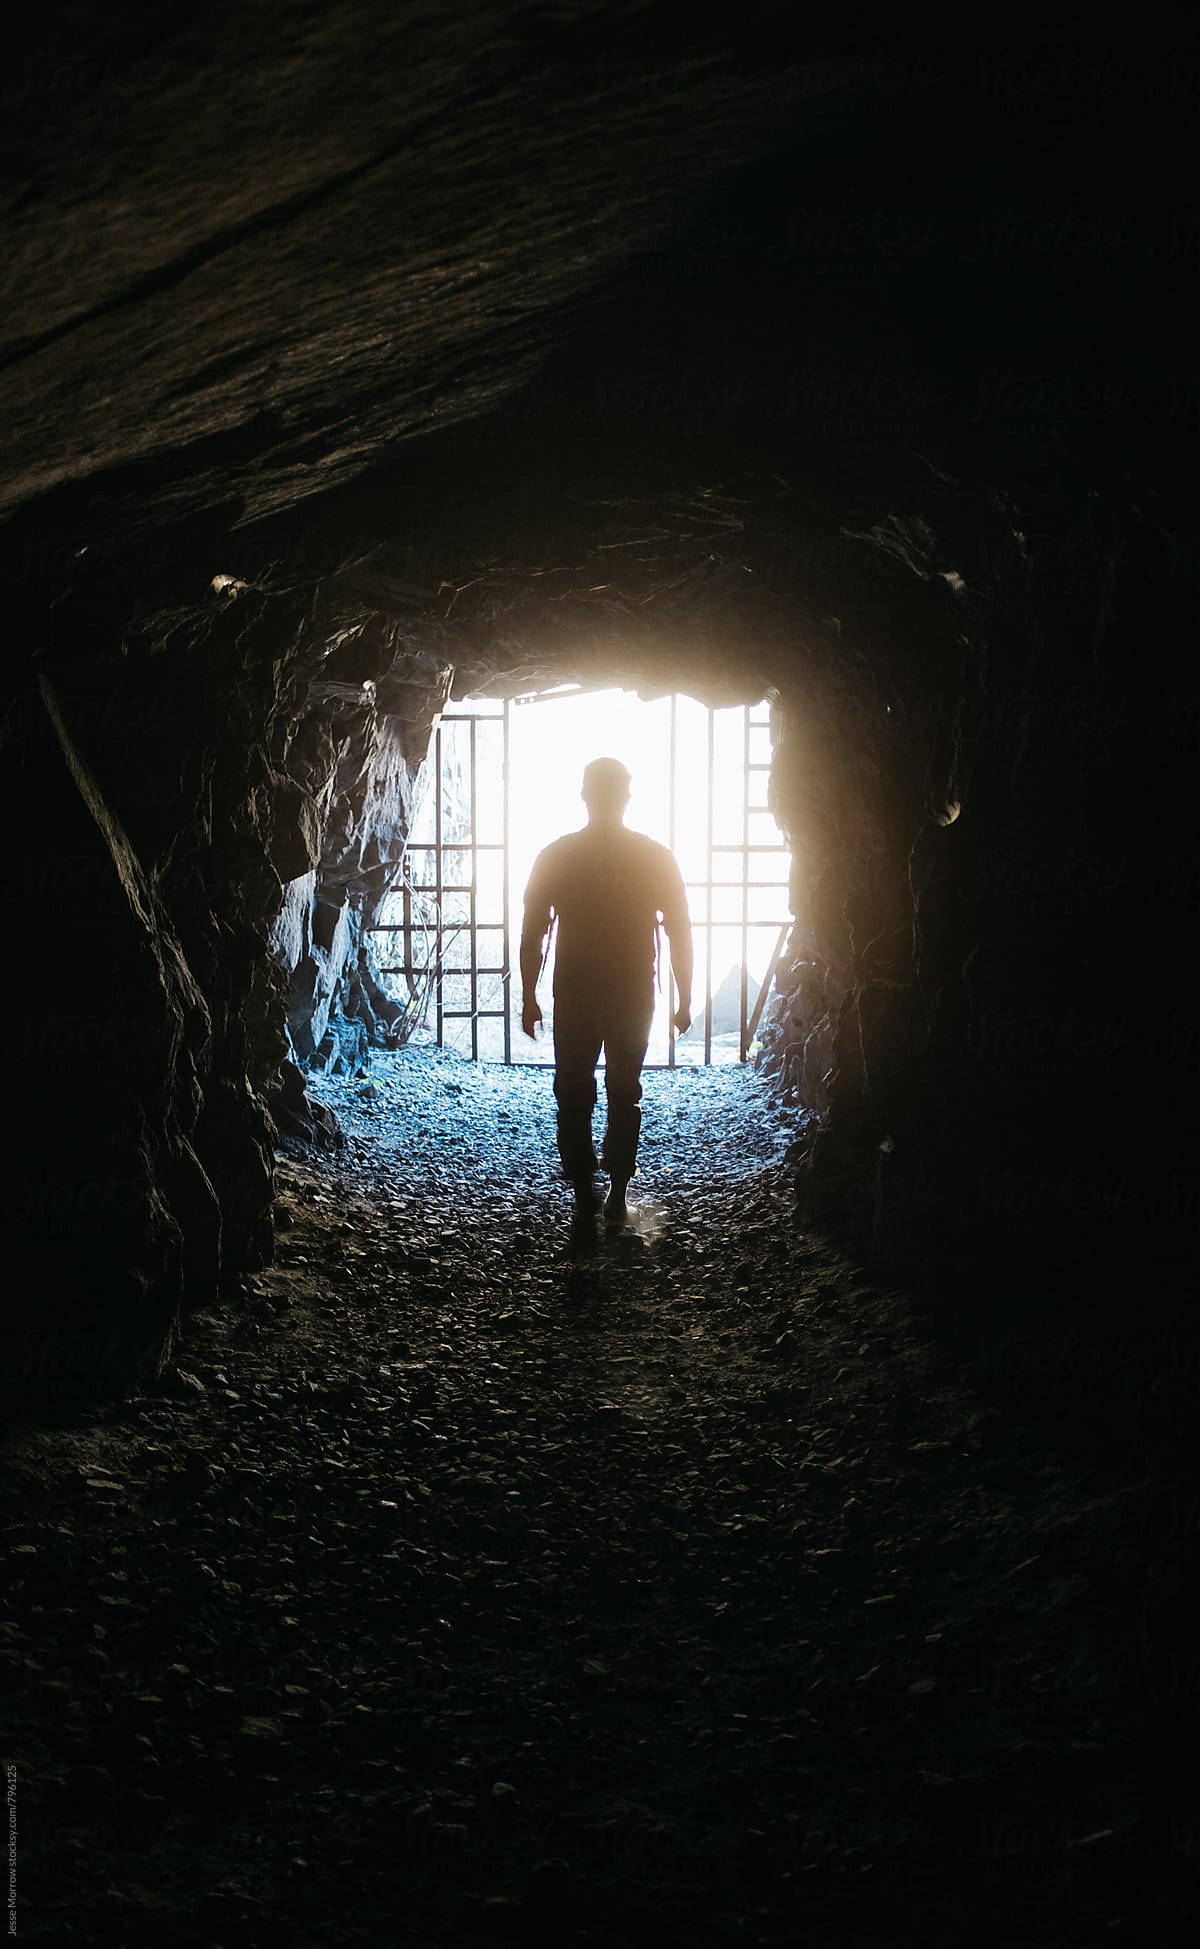 Silhouette Of Man At The End Of The Tunnel Walking Into Light | Stocksy ... Silhouette Man Walking Tunnel